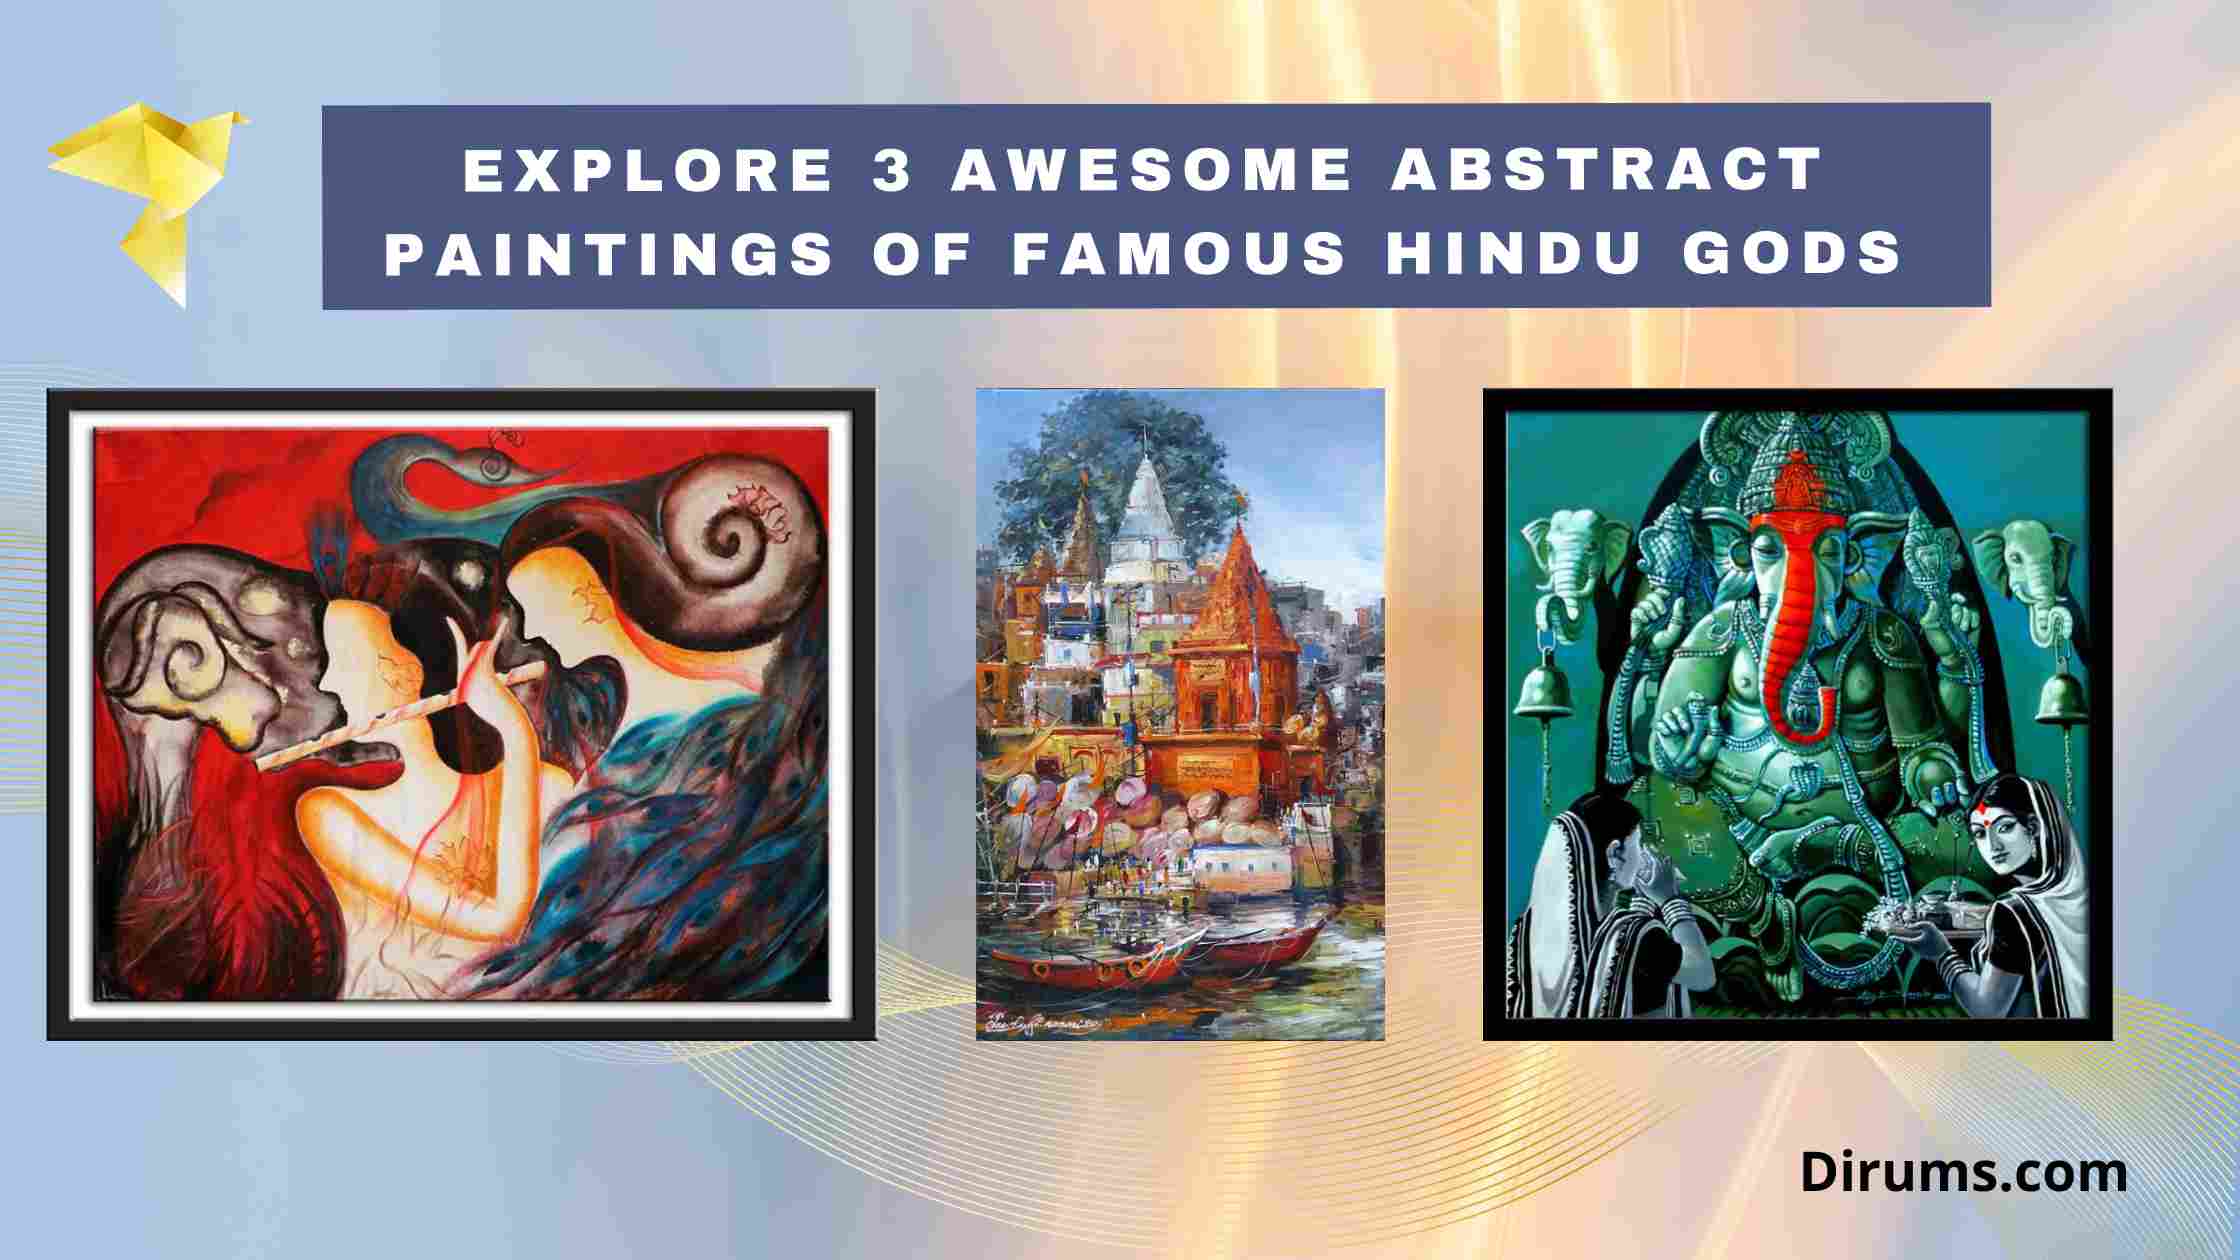 Explore 3 Awesome Abstract Paintings of Famous Hindu Gods